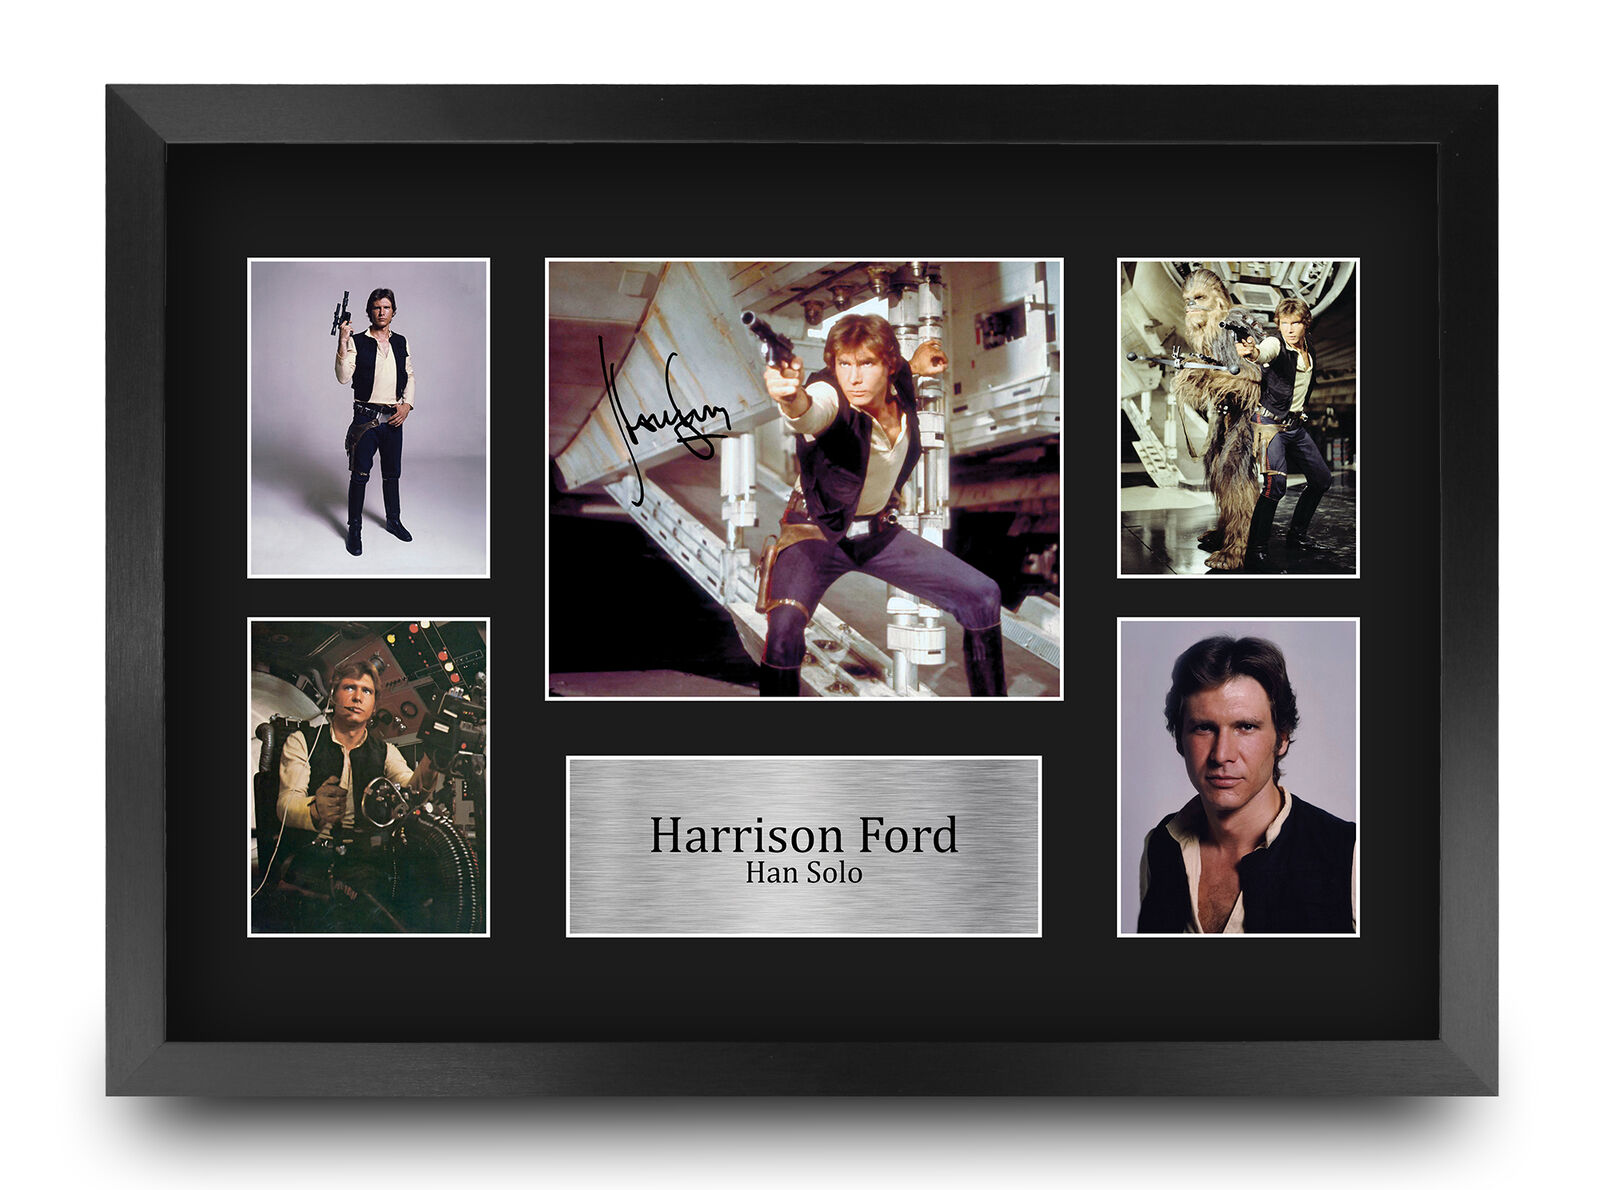 Harrison Ford Star Wars Han Solo Framed Autograph Picture A3 Print for Movie Fan